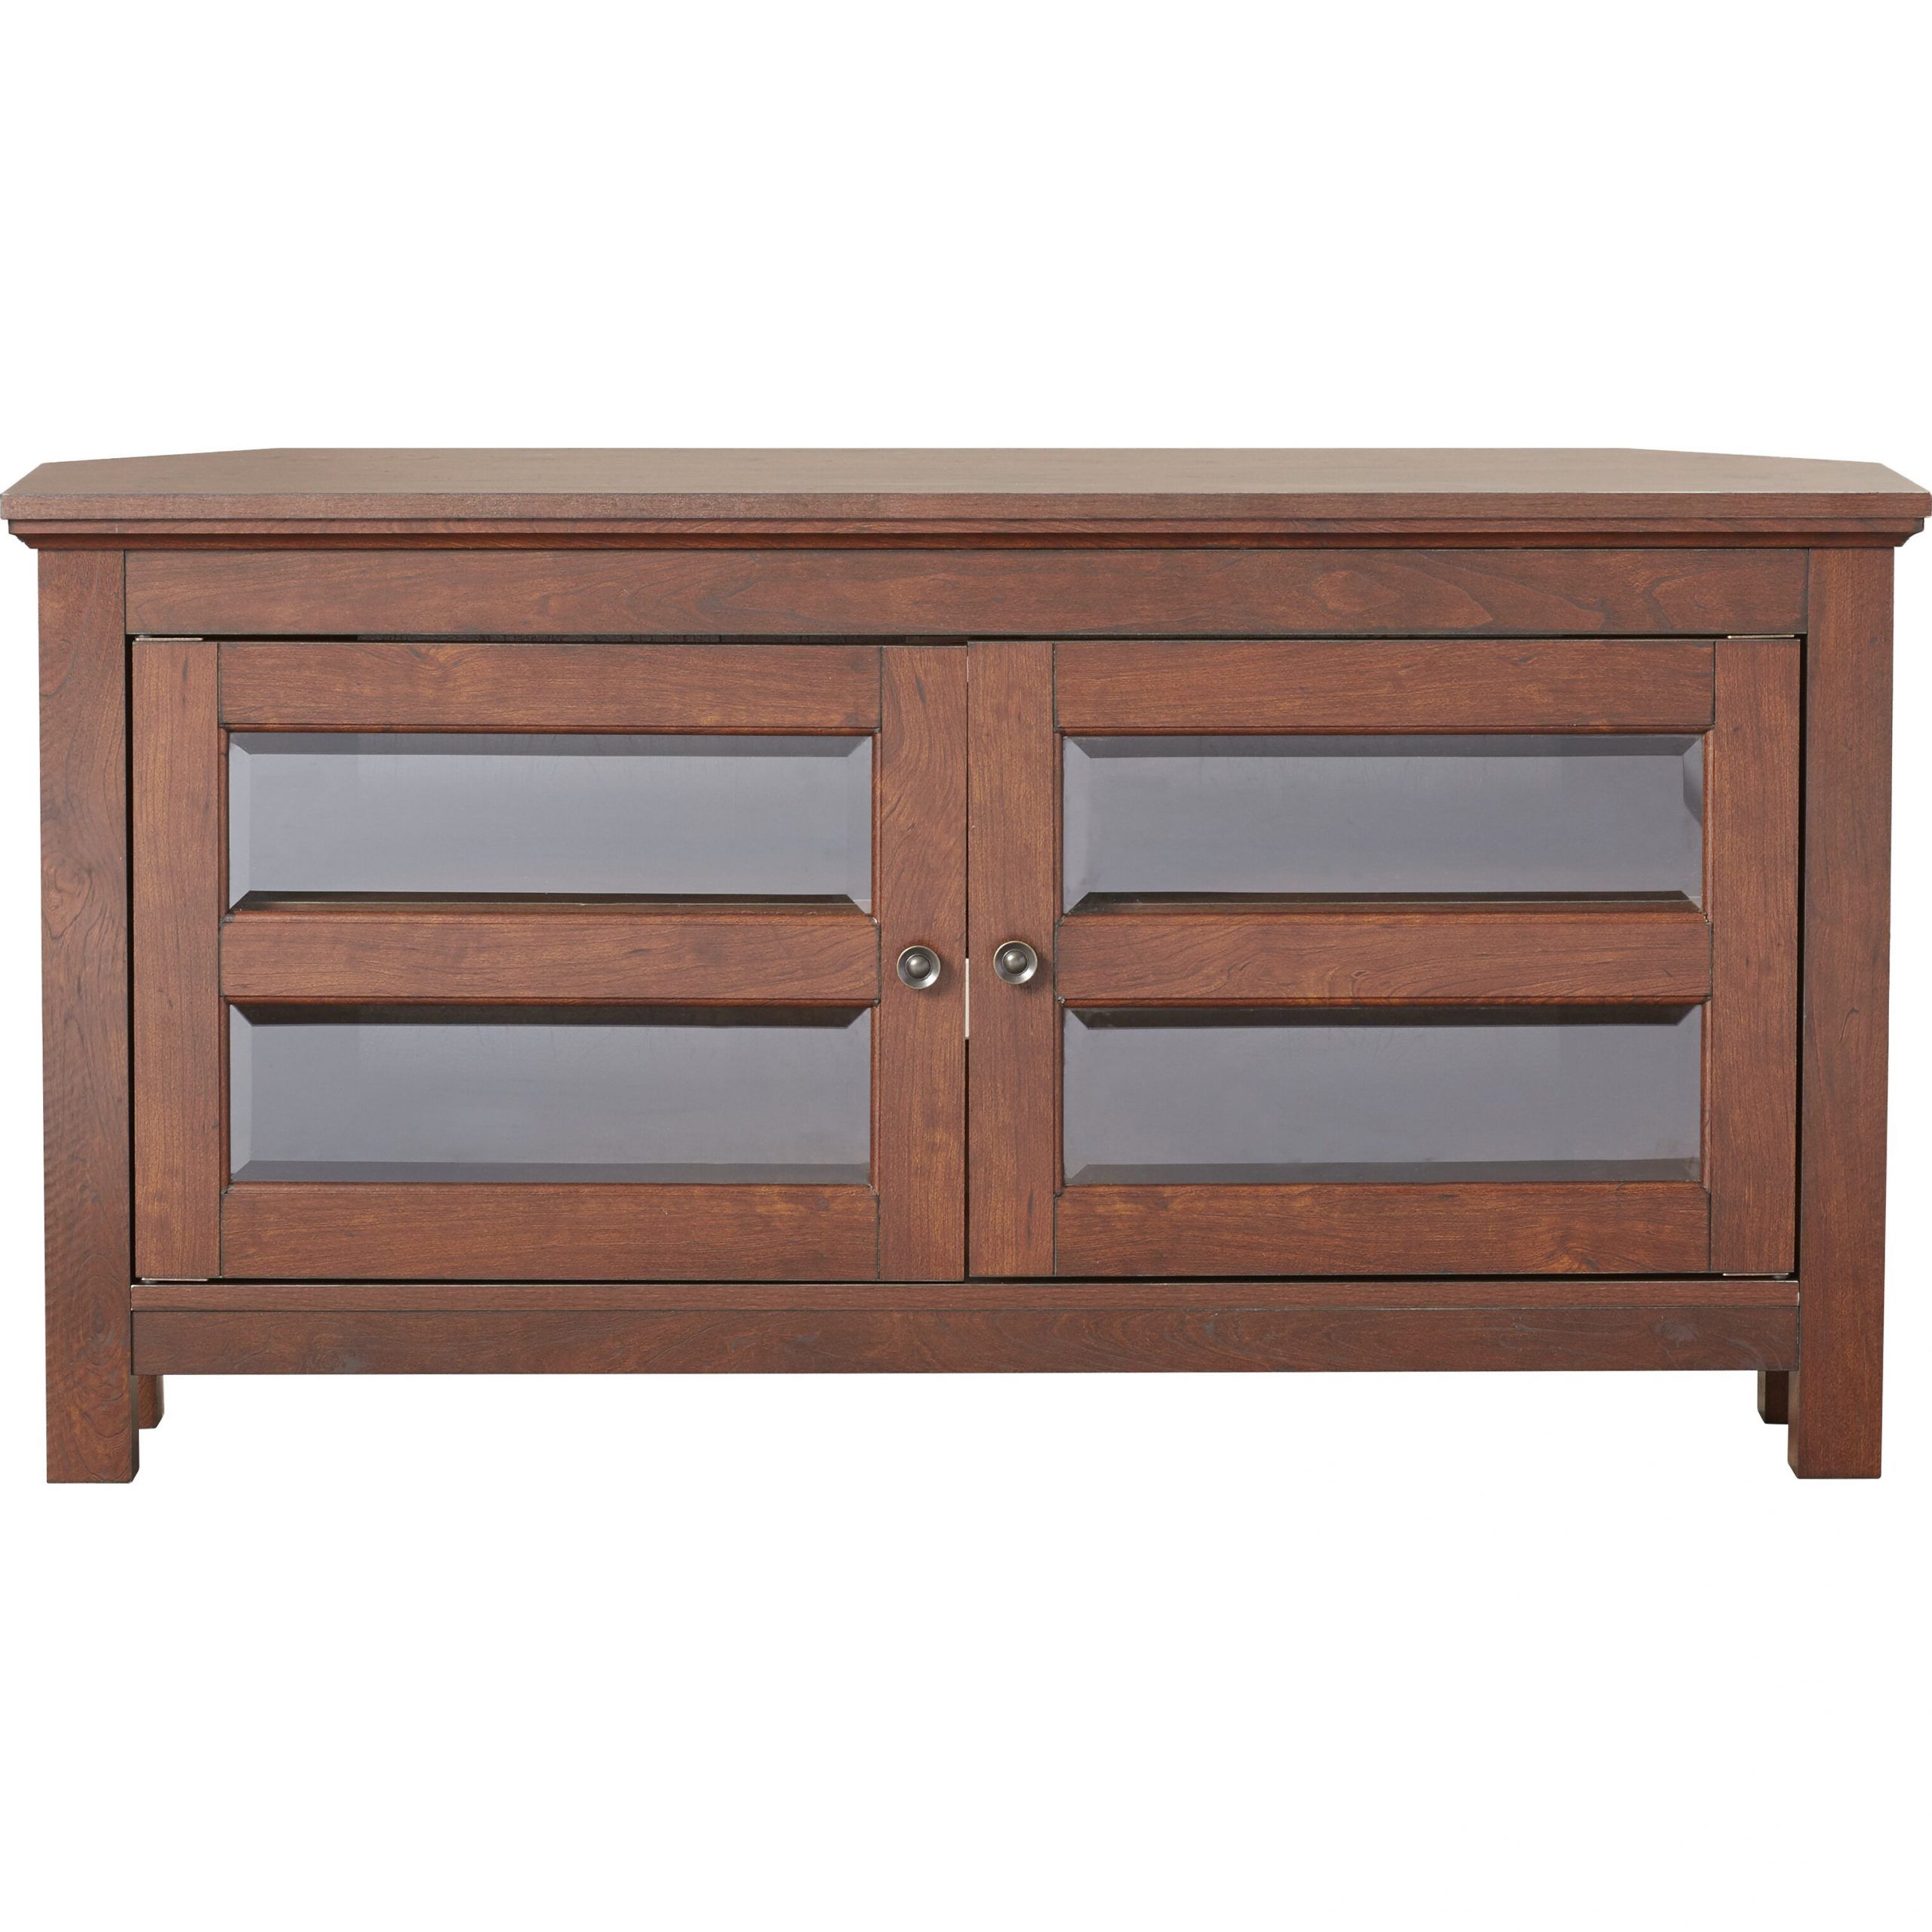 Three Posts Spartansburg Wood Corner Tv Stand & Reviews Pertaining To Wooden Corner Tv Stands (View 15 of 15)